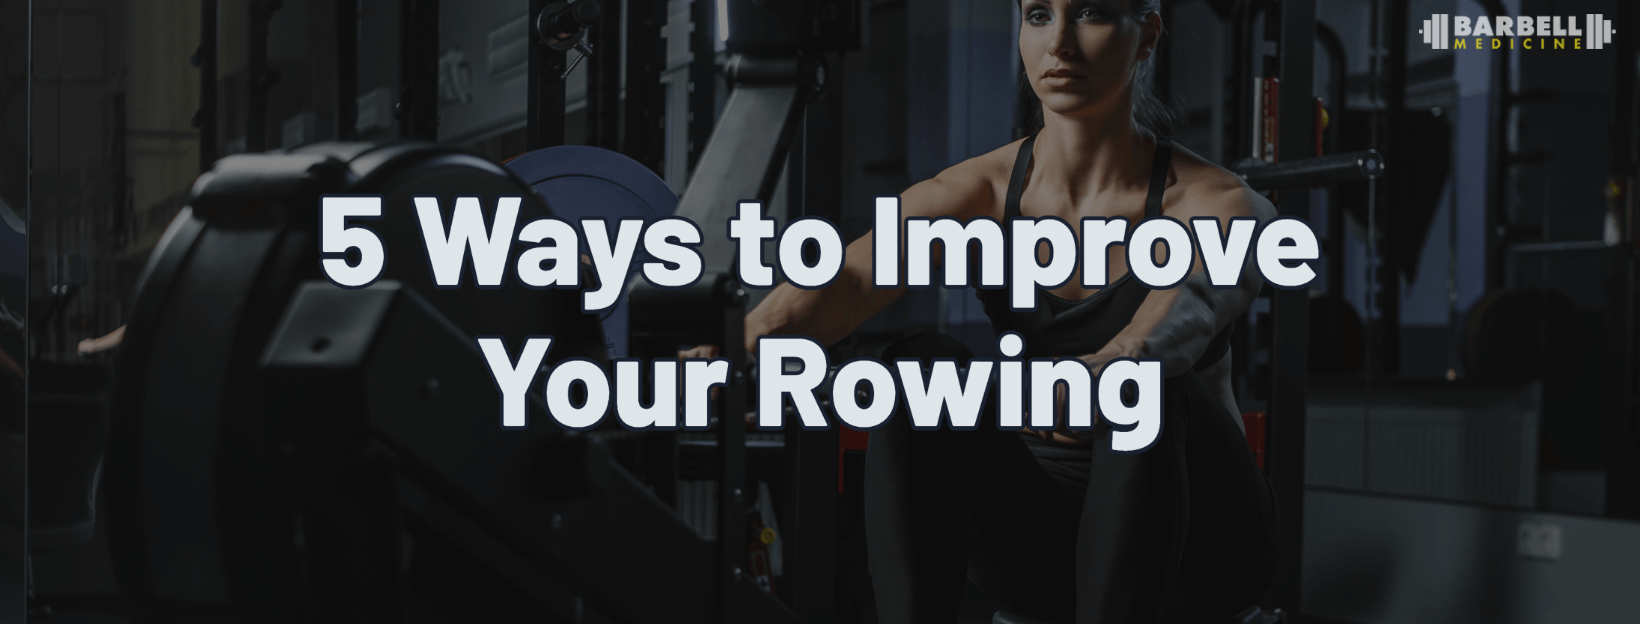 Nutrition Spur 5 Ways to Improve Your Rowing